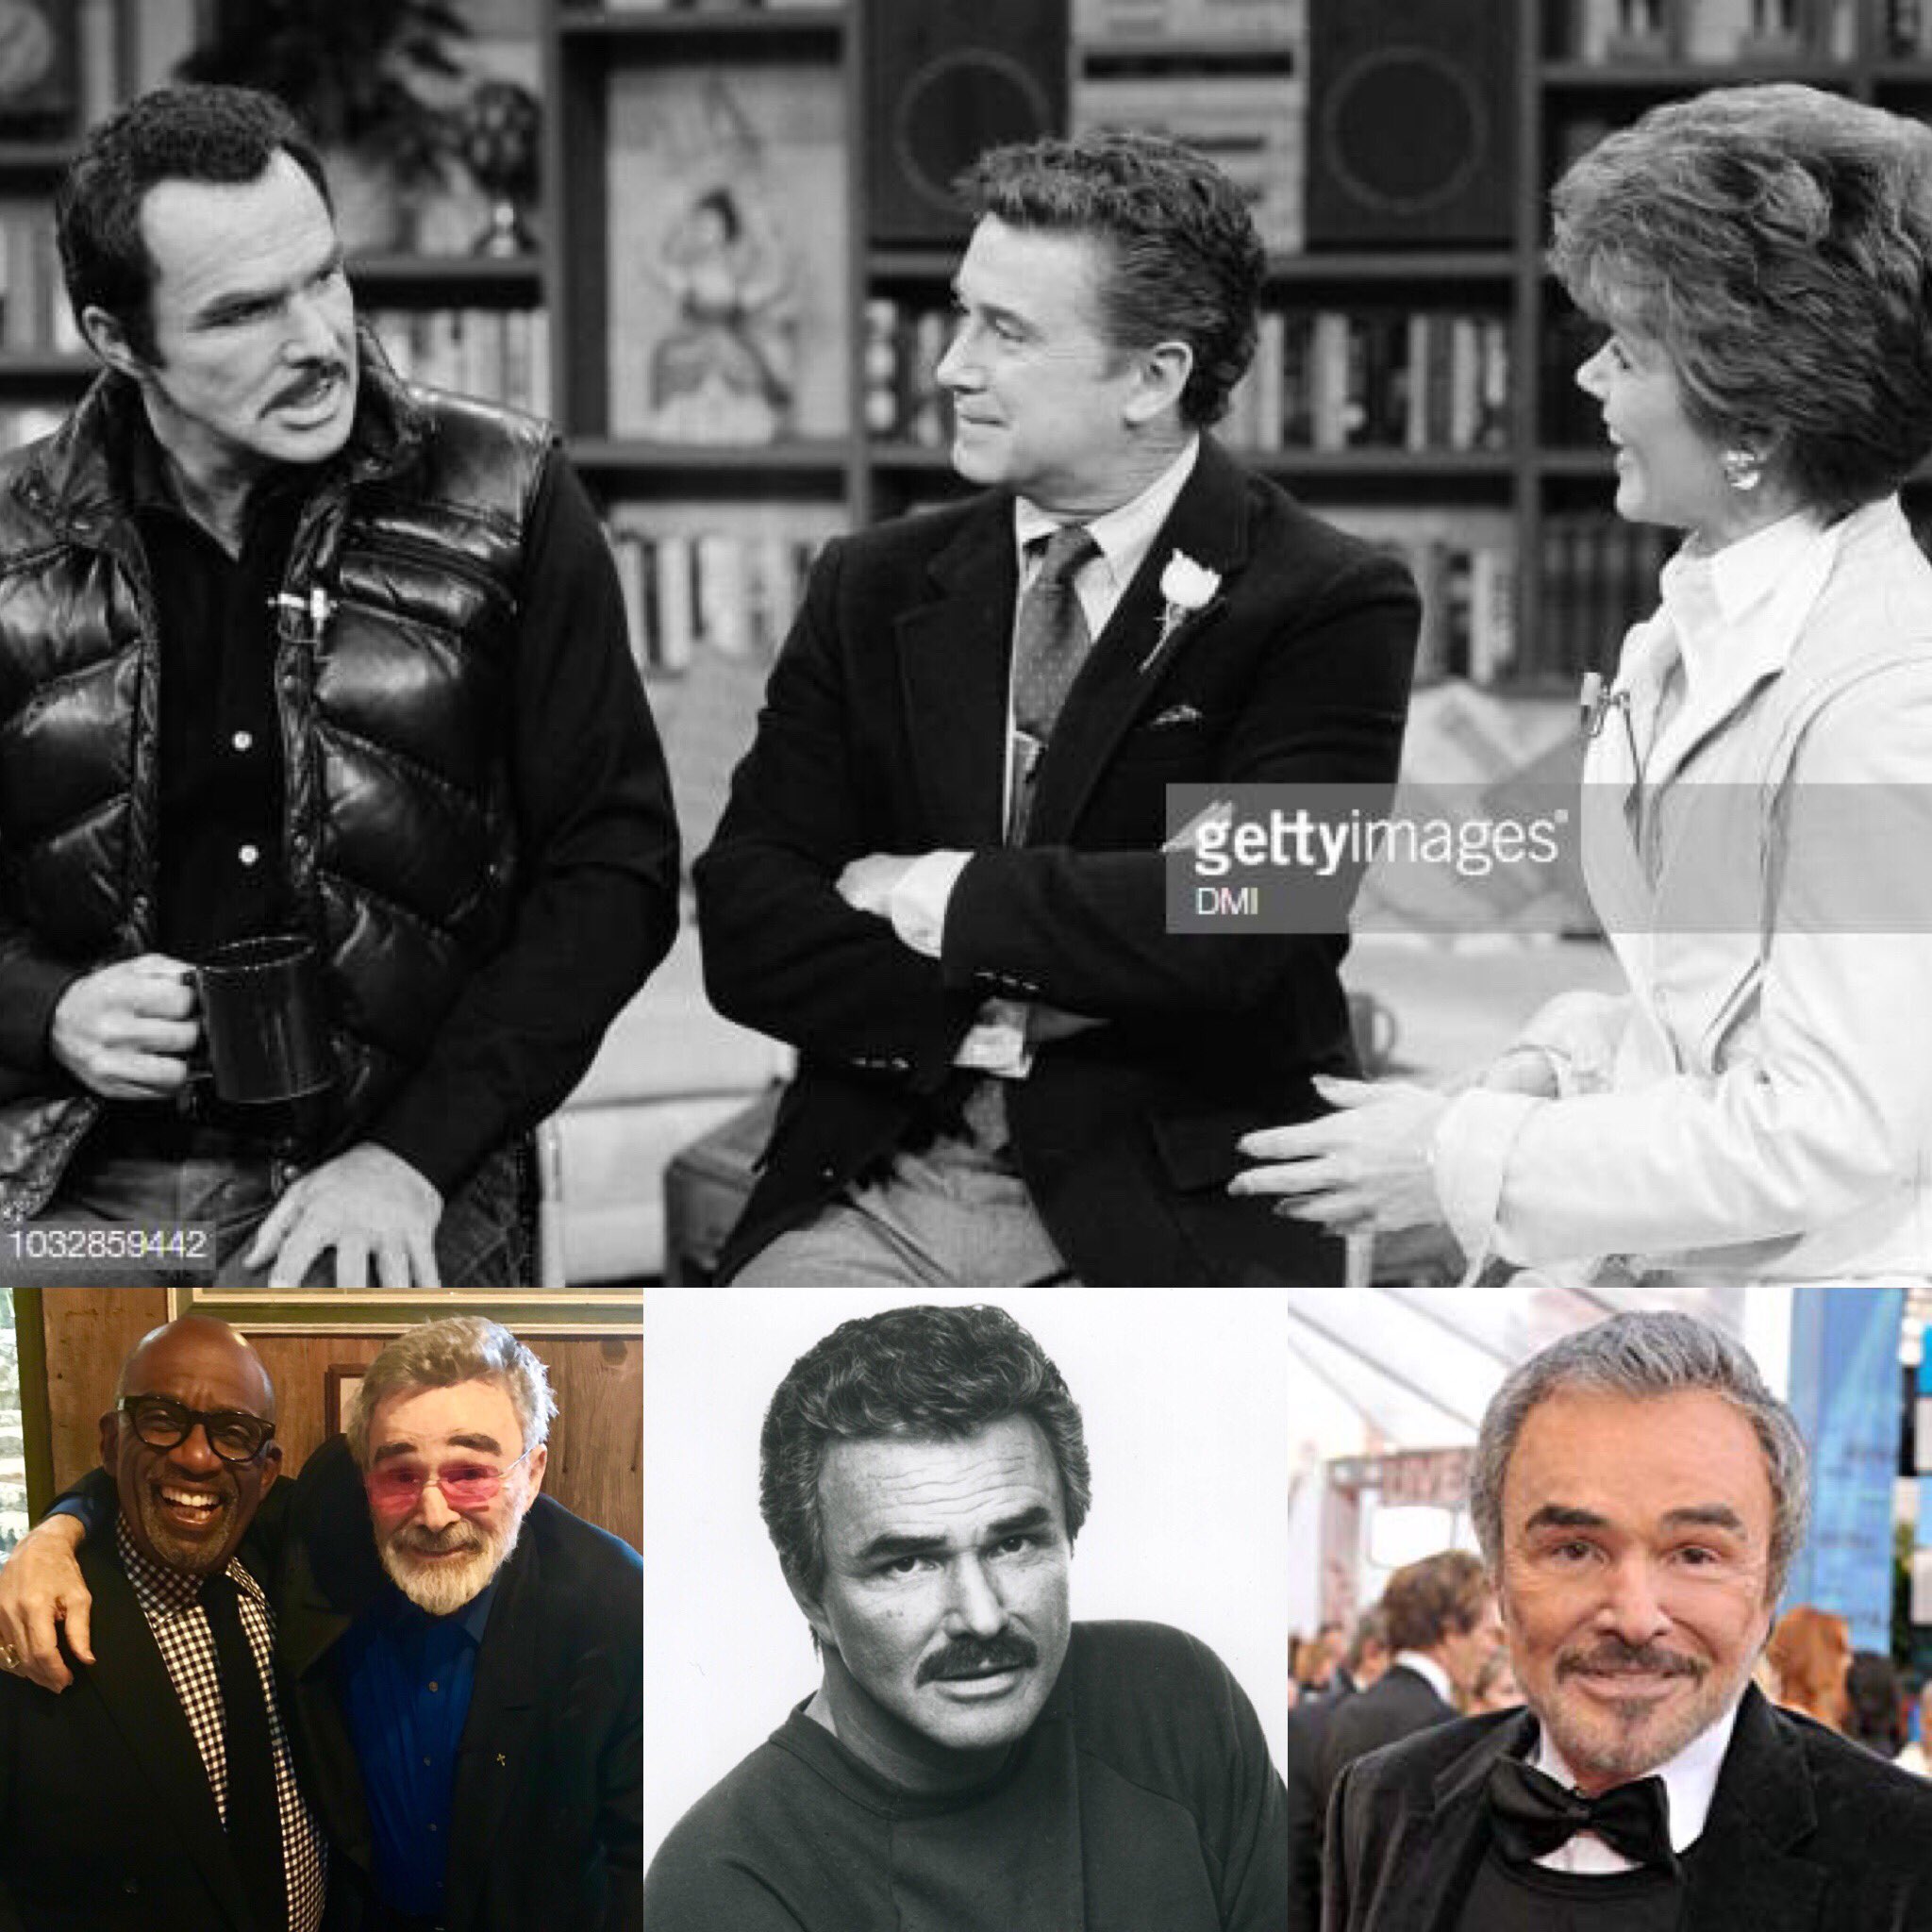 Happy 83 birthday to Burt Reynolds up in heaven. May he Rest In Peace.  